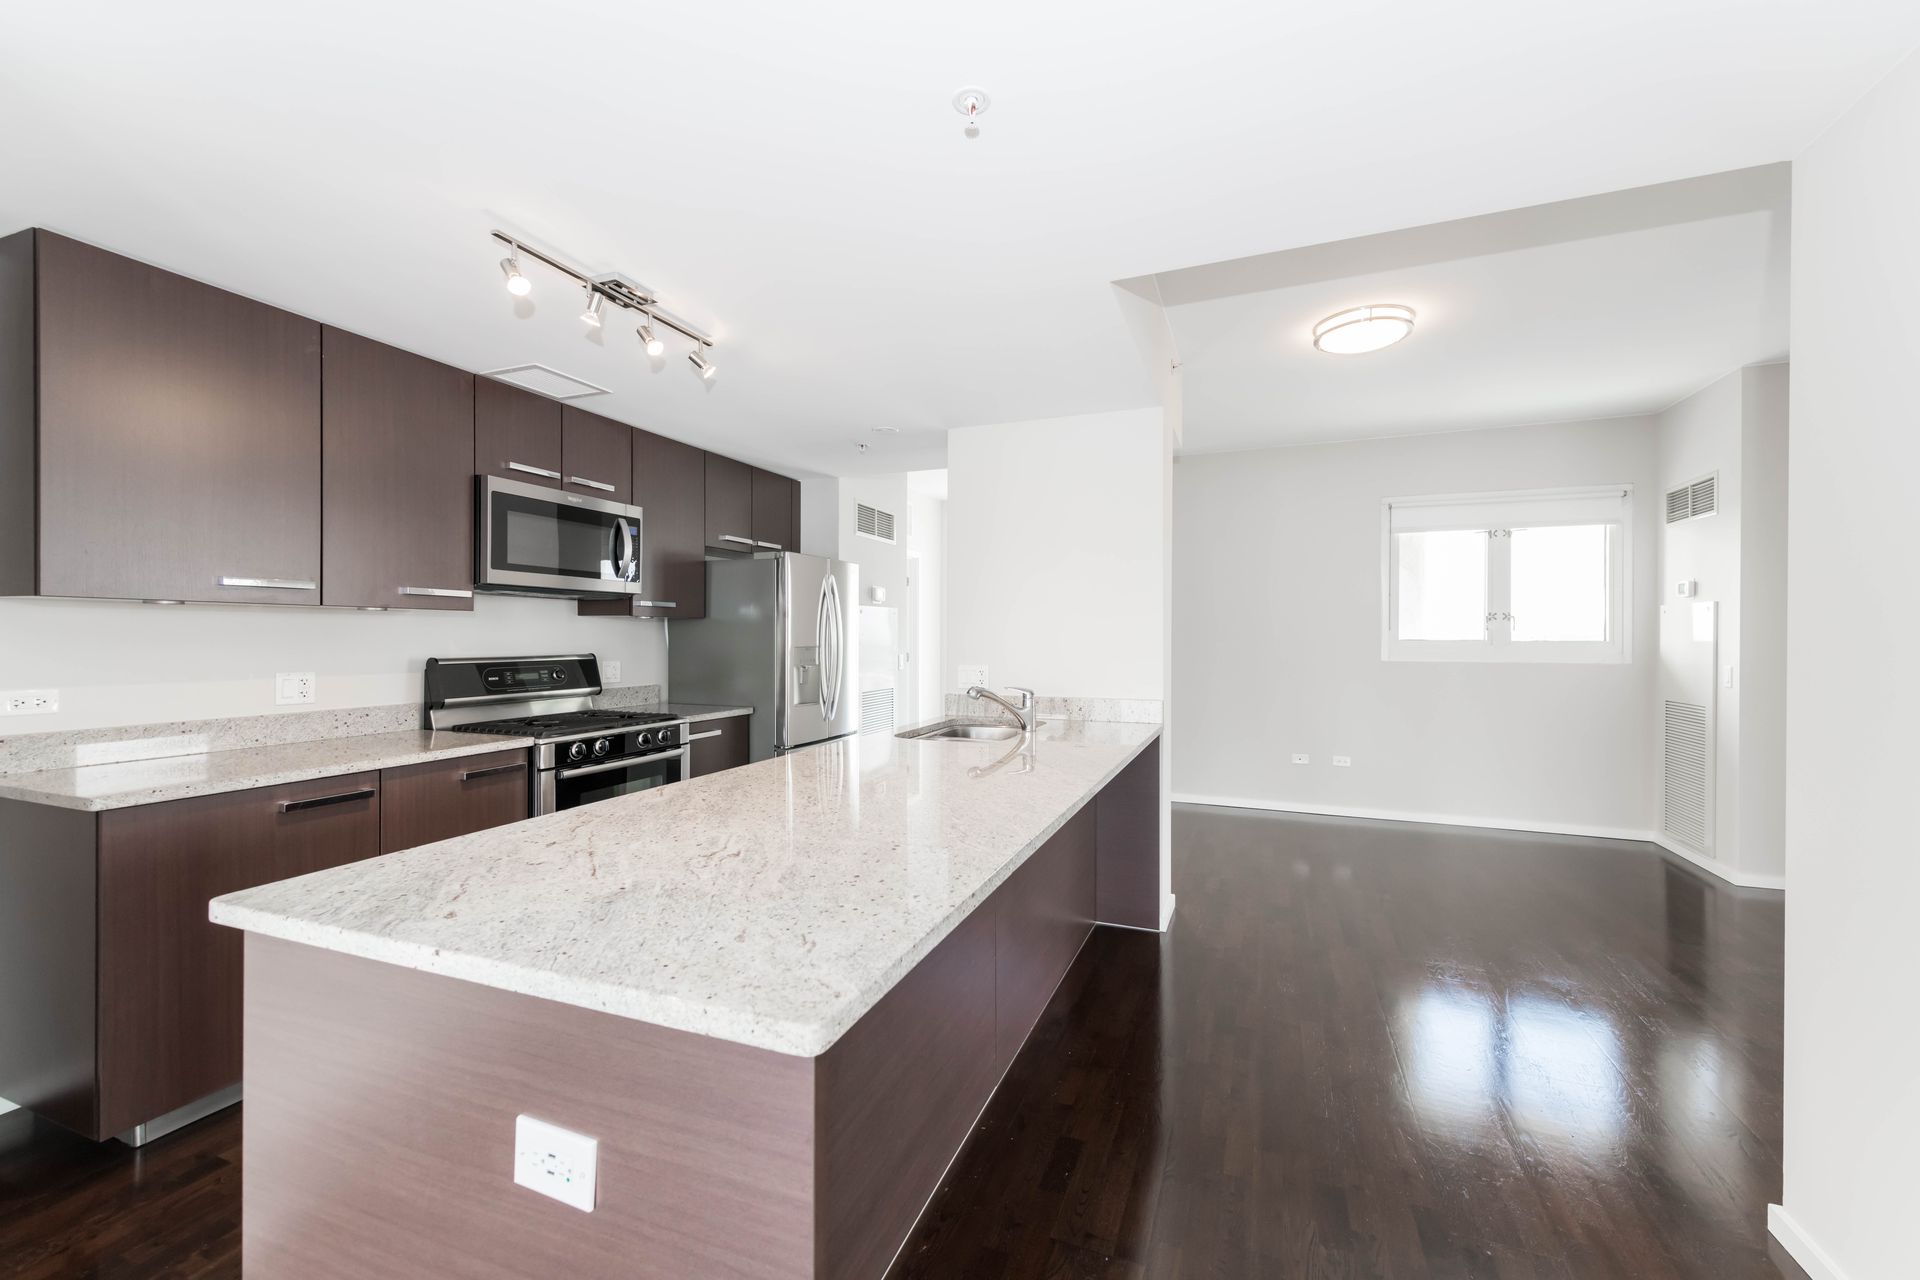 A kitchen with a large island in the middle of it at 24 S Morgan Apartments.